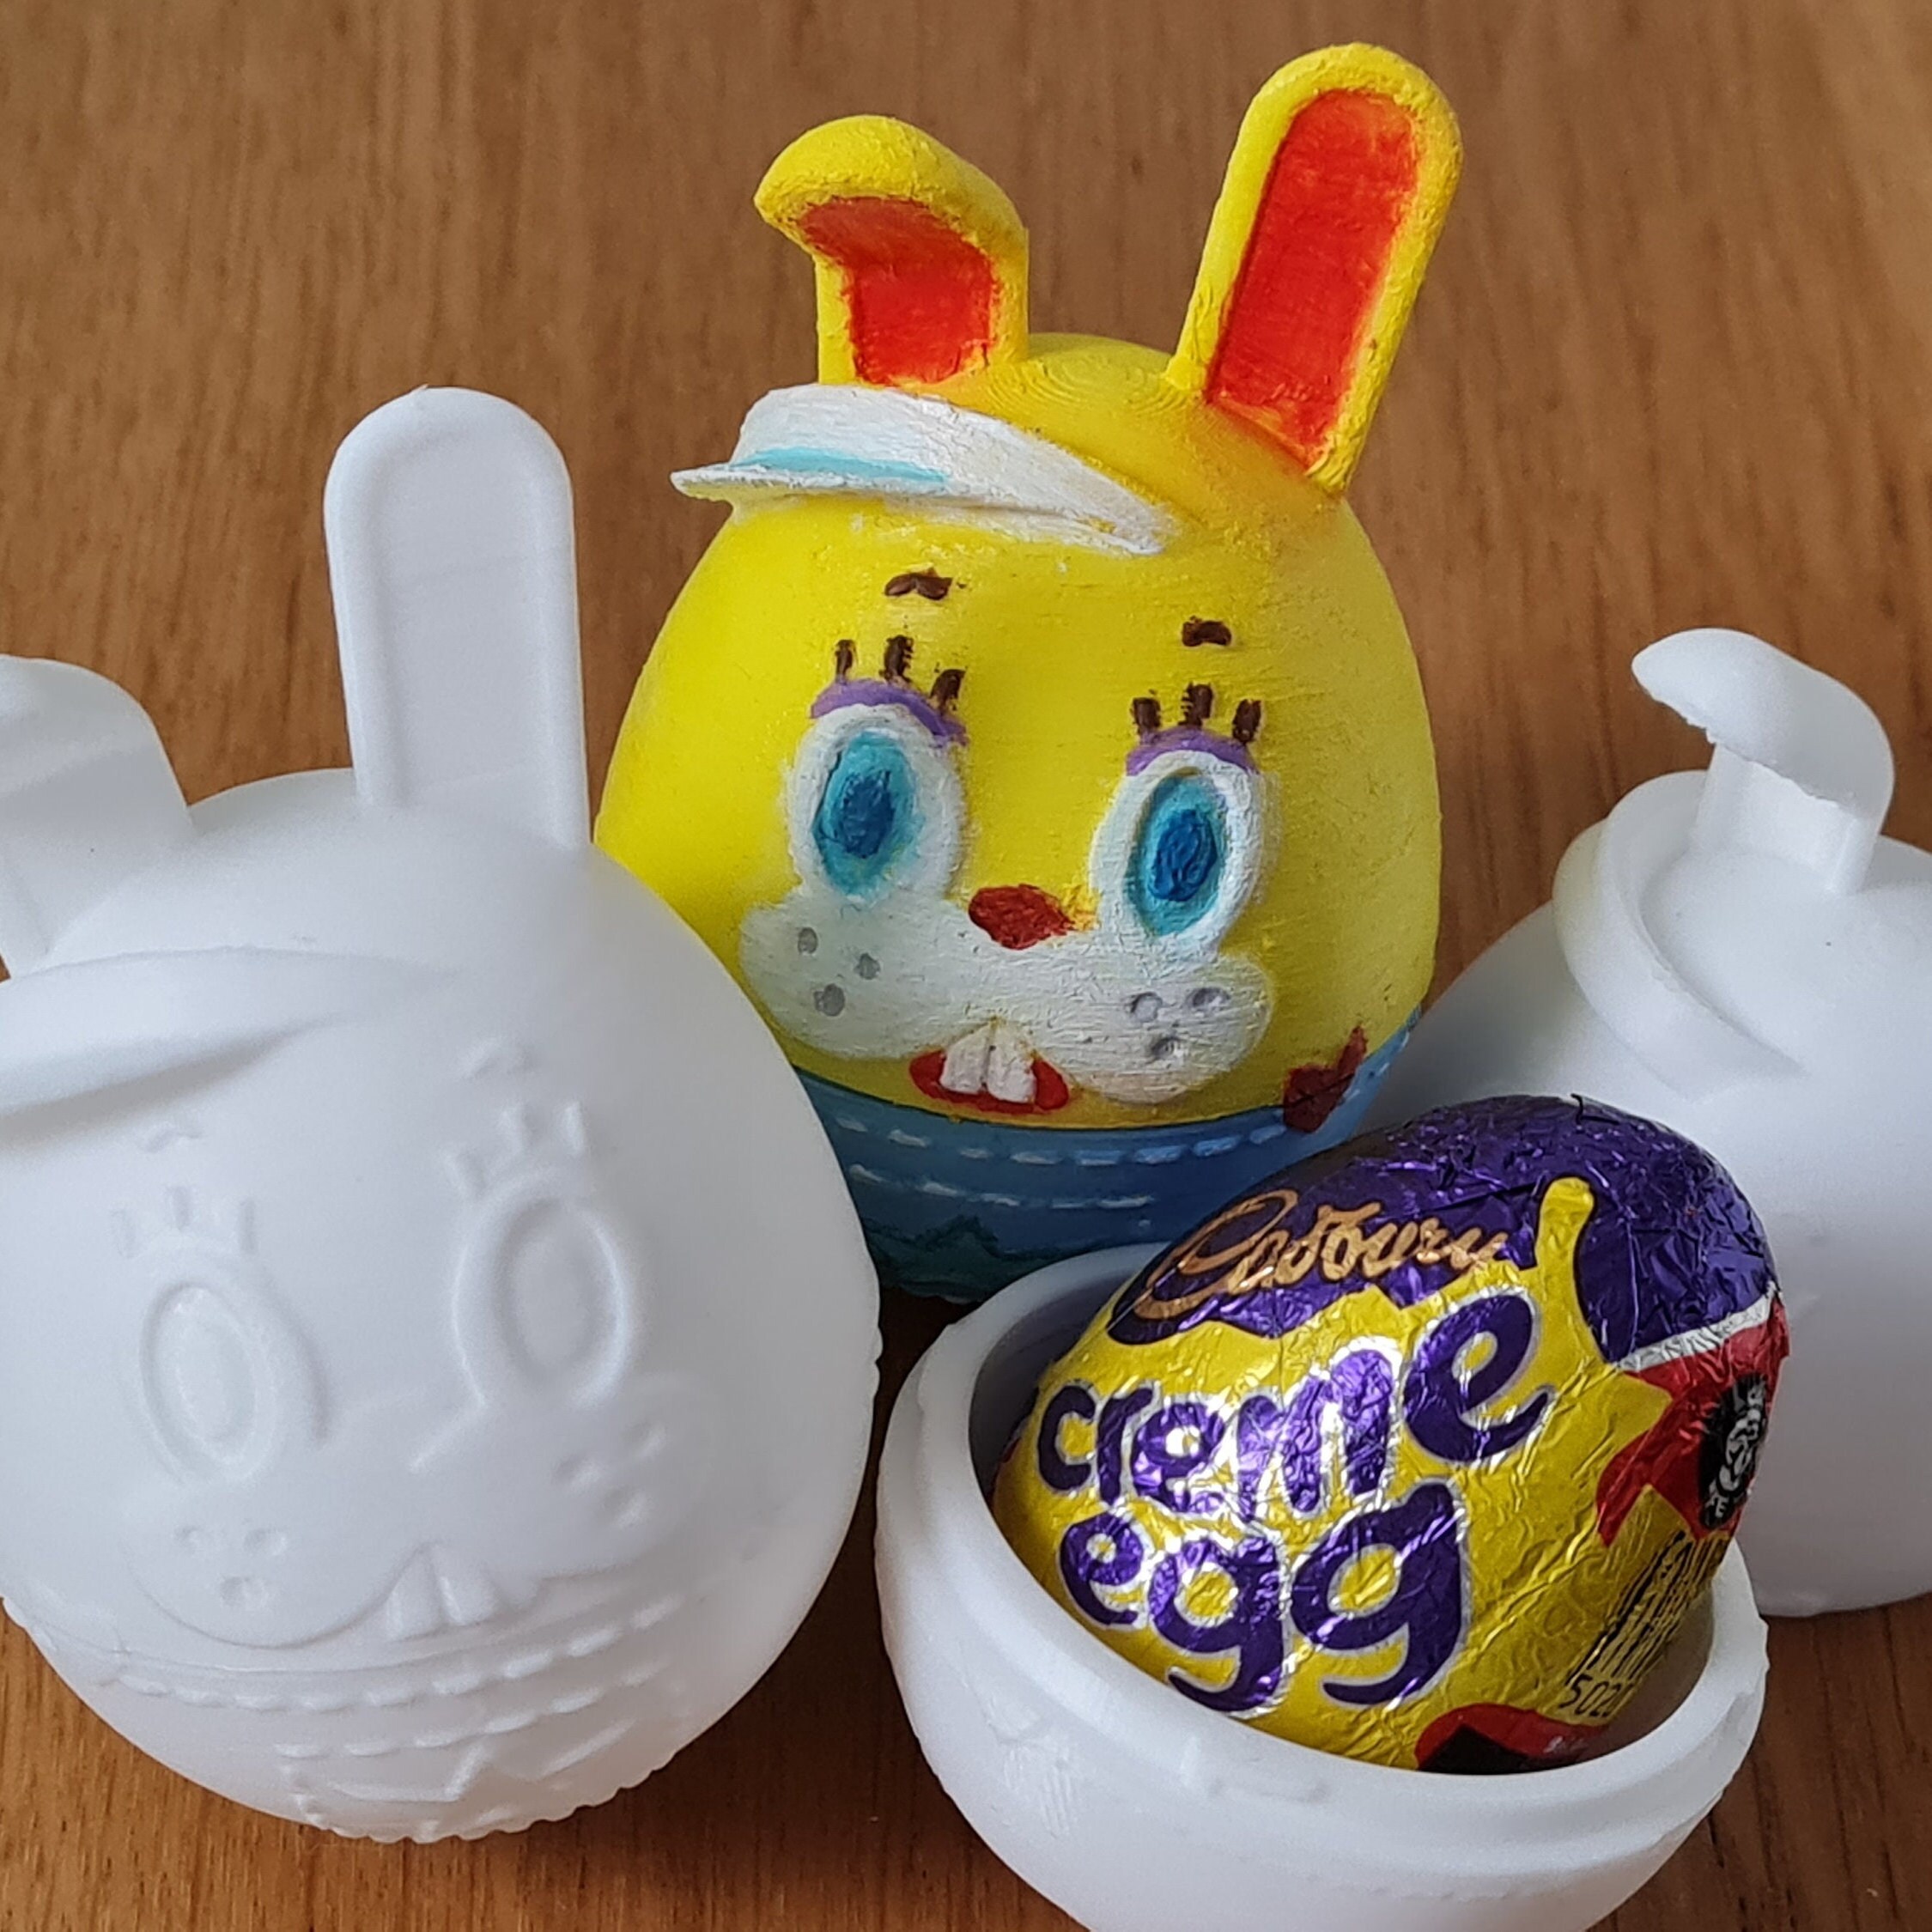 Create your own Weeble Wooble using Plastic Easter Eggs